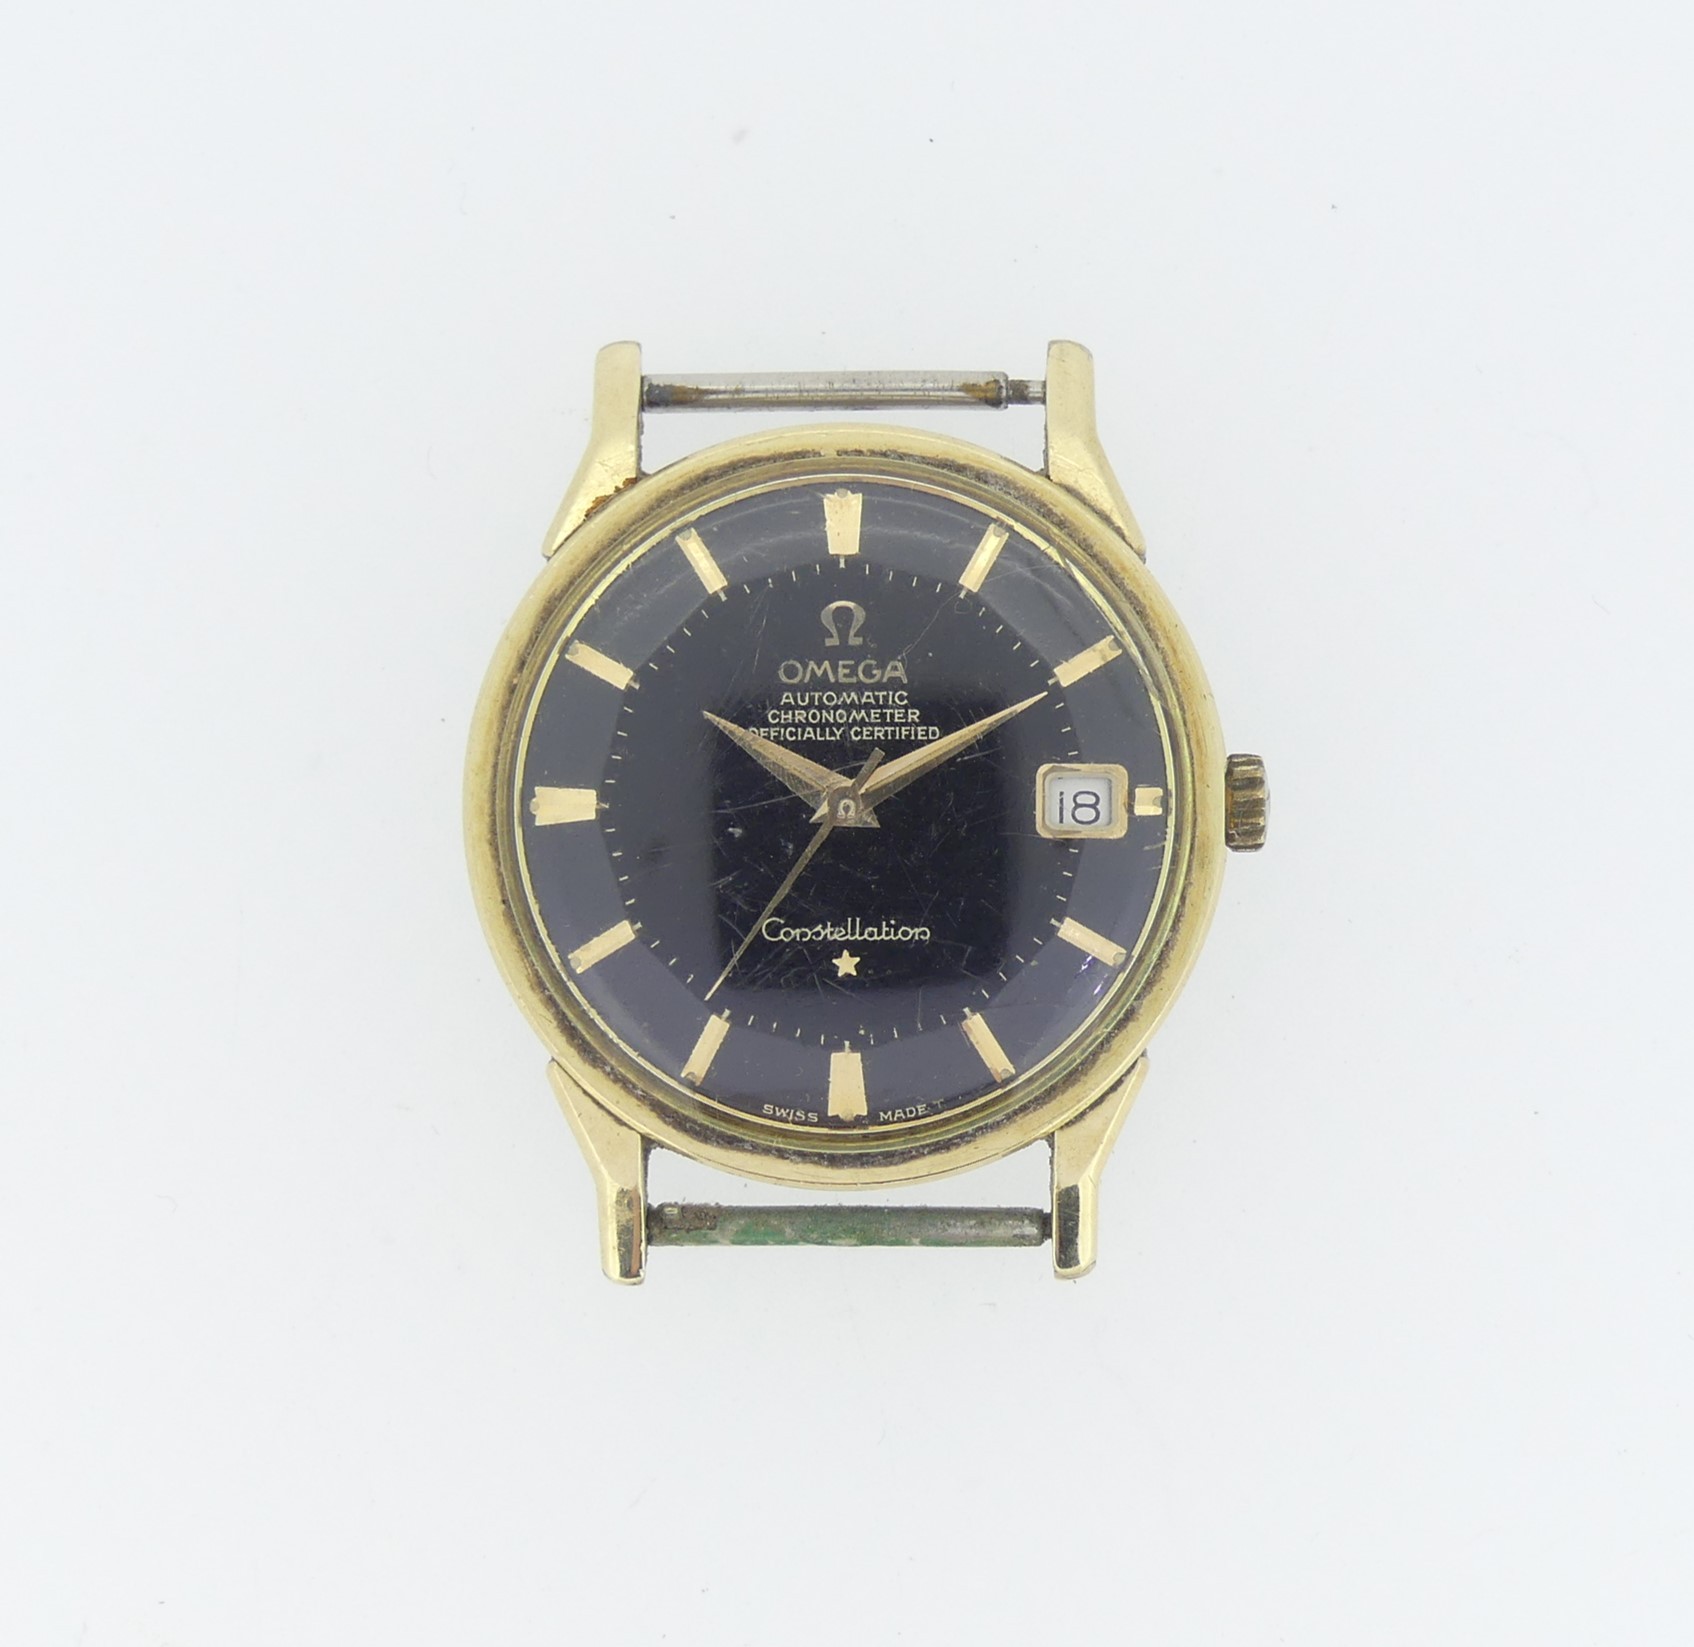 An Omega Constellation gold plated Wristwatch, 168.005, cal.561 movement no. 20952657, black dial